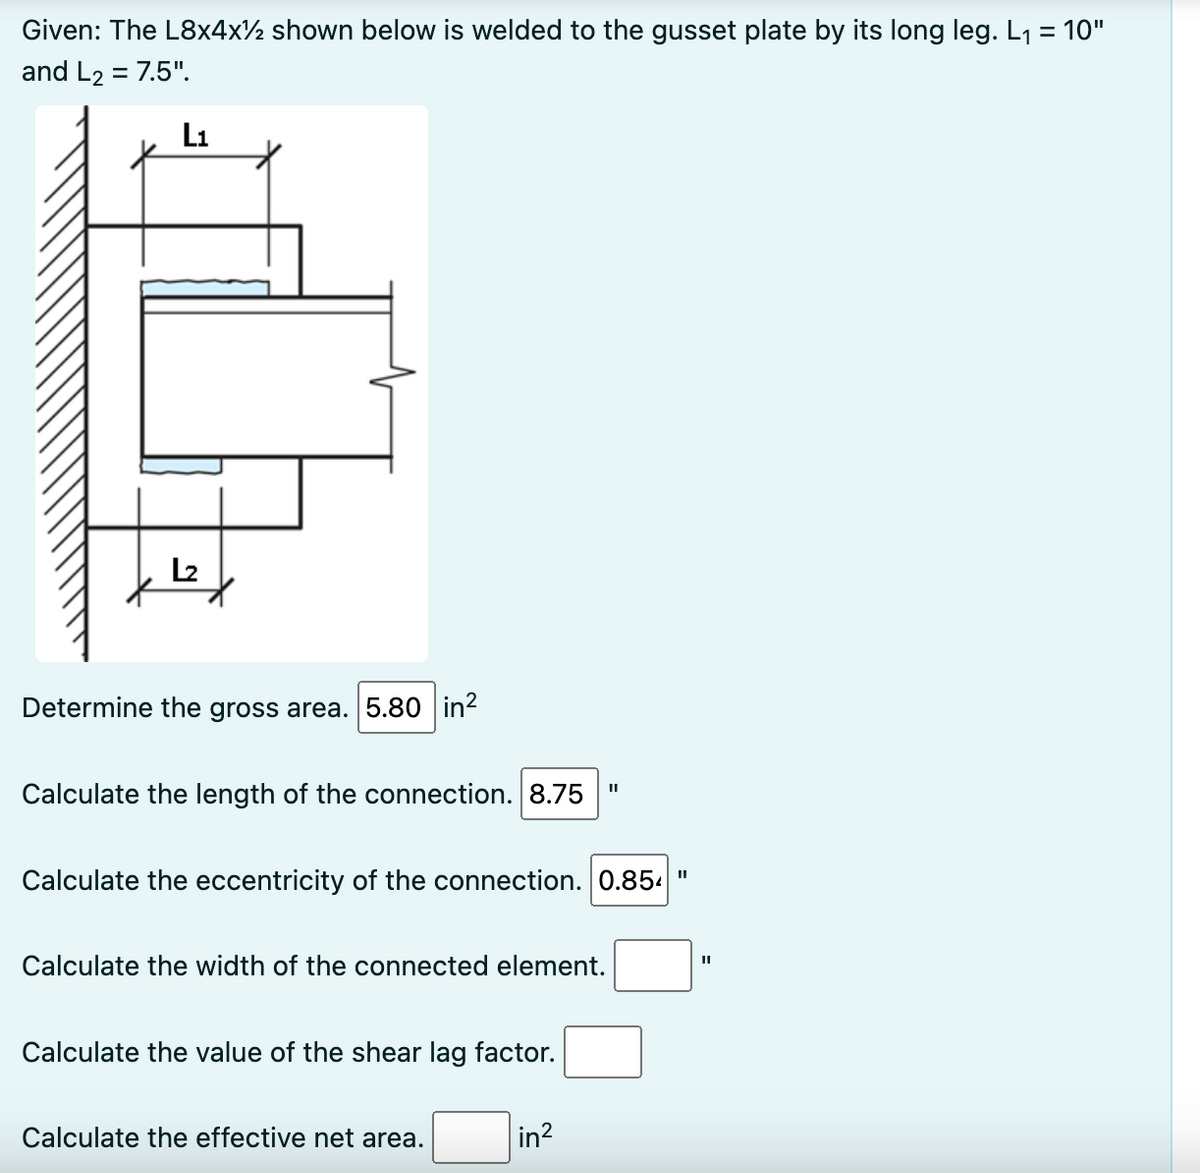 Given: The L8x4x½ shown below is welded to the gusset plate by its long leg. L₁ = 10"
and L₂ = 7.5".
L₁
L₂
Determine the gross area. 5.80 in²
Calculate the length of the connection. 8.75
Calculate the eccentricity of the connection. 0.854"
Calculate the width of the connected element.
Calculate the value of the shear lag factor.
Calculate the effective net area.
in²
II